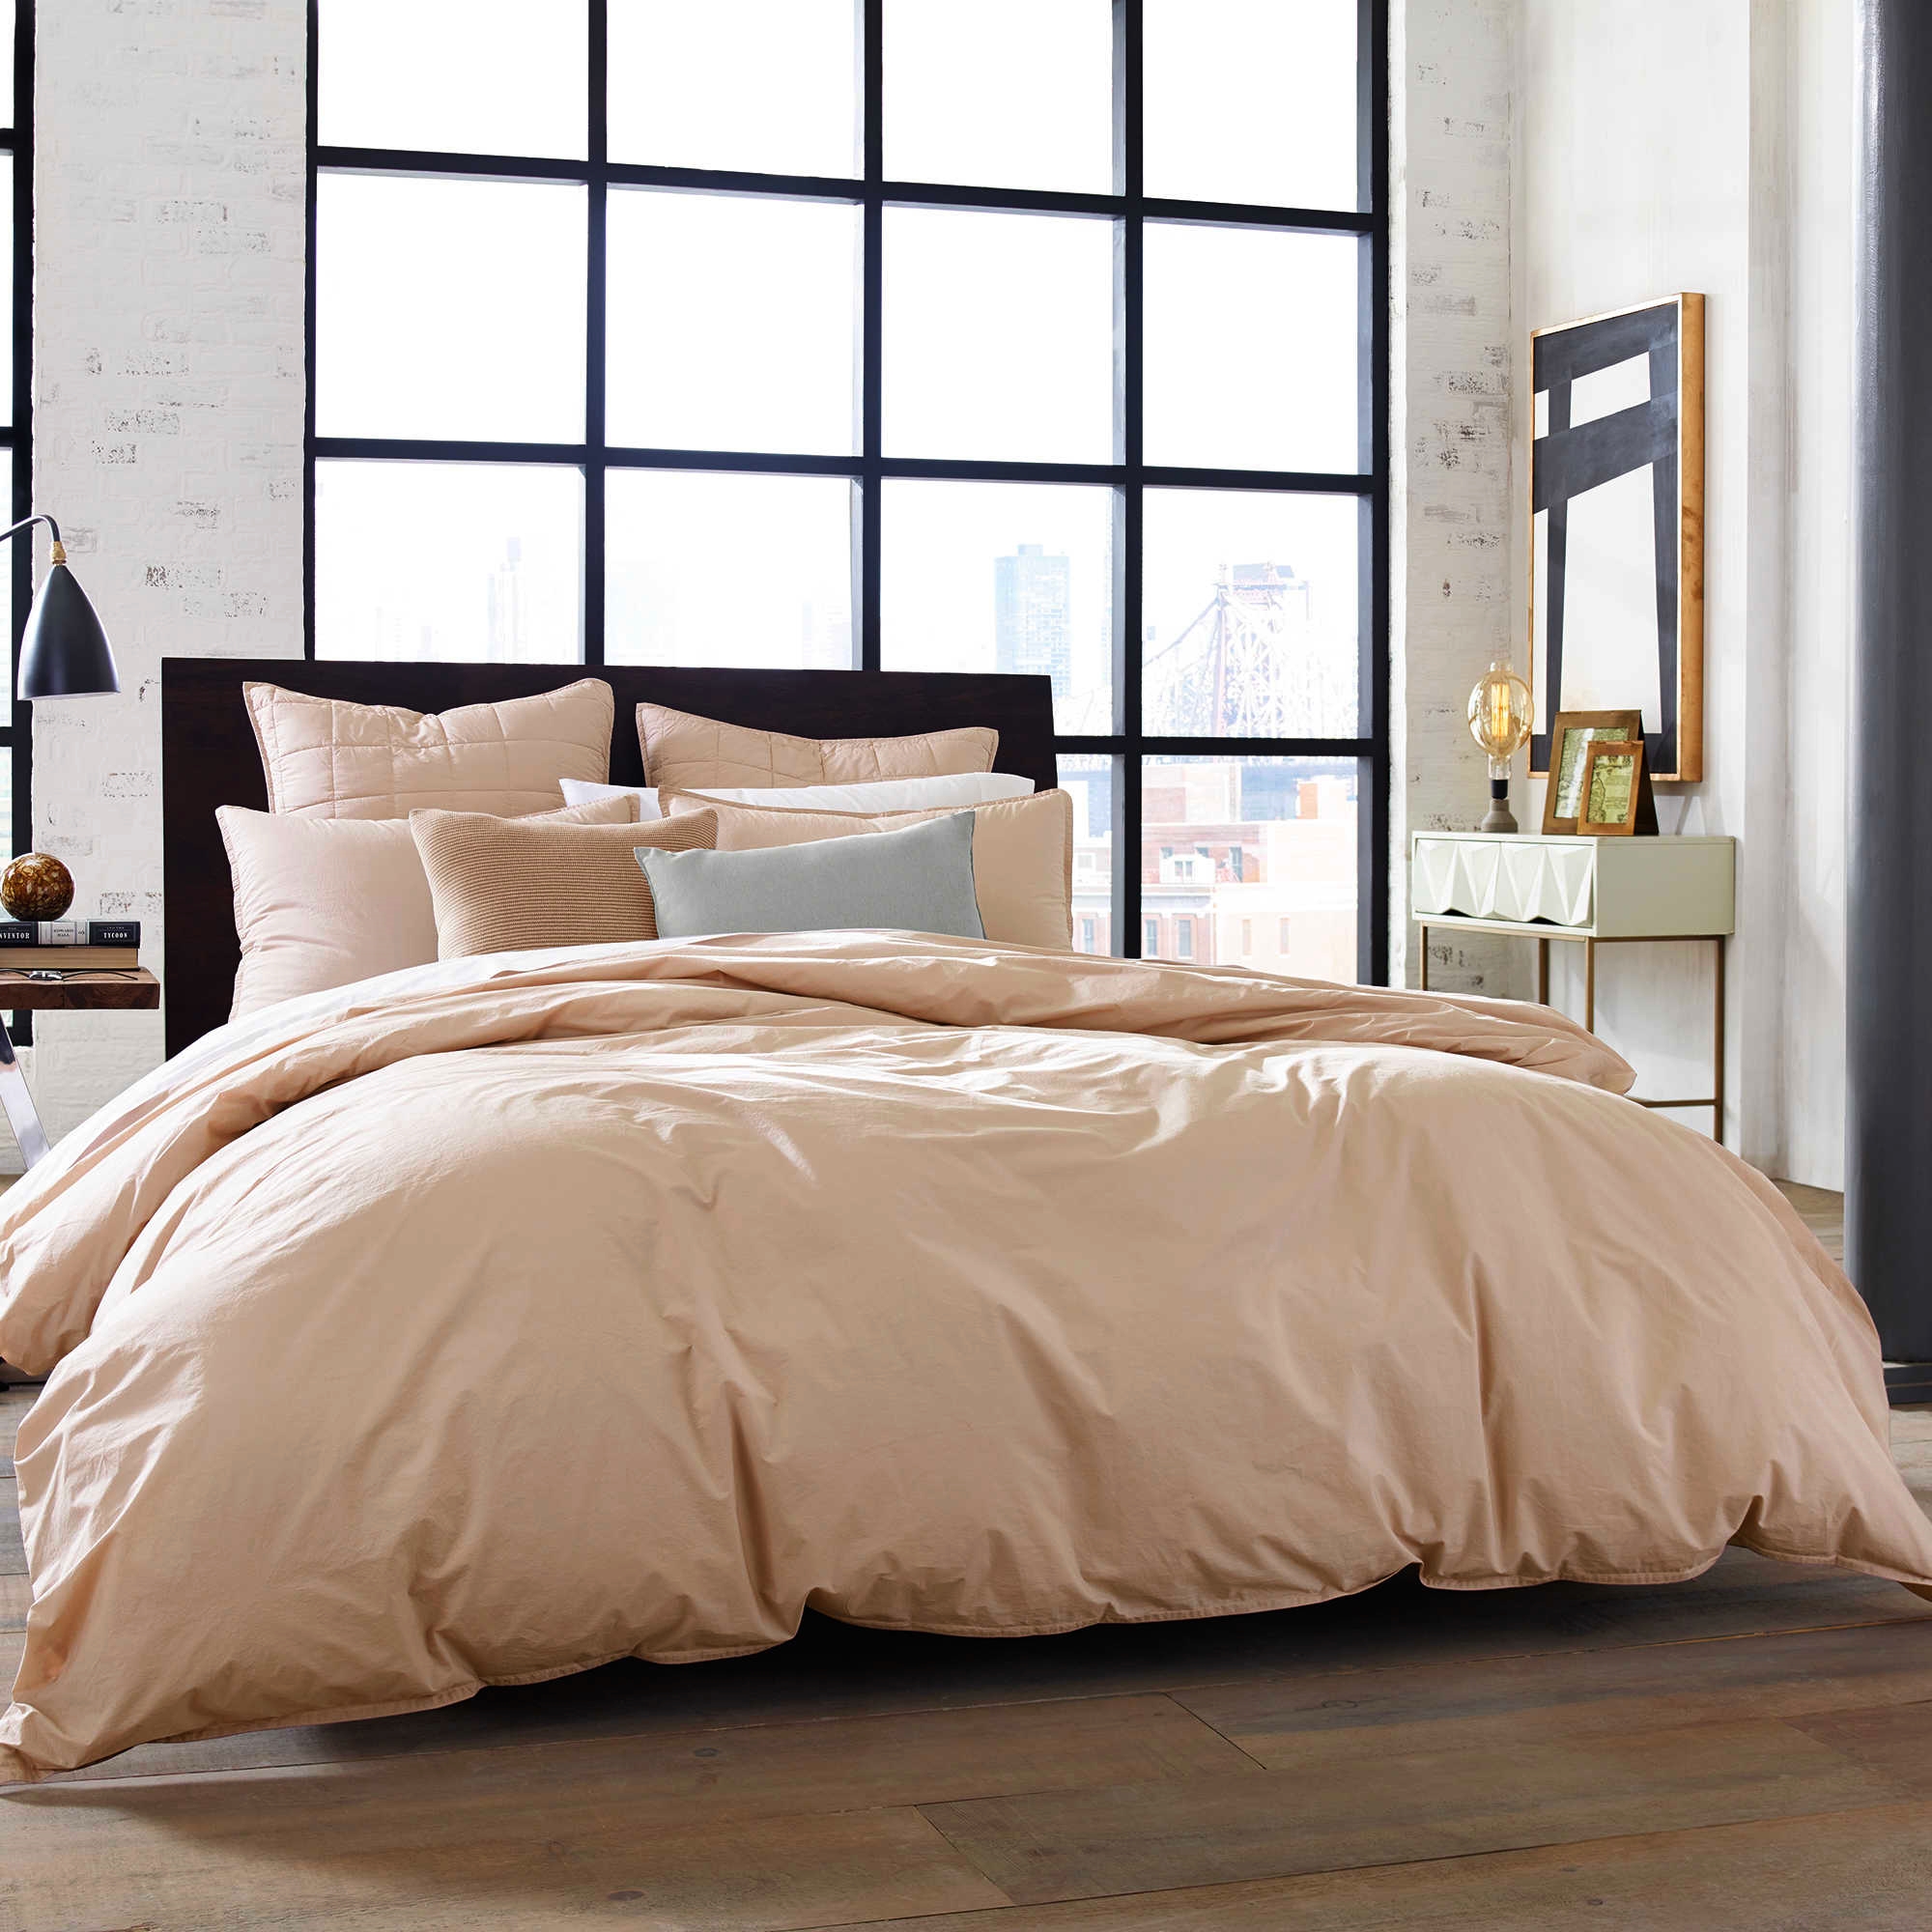 Kenneth Cole Ny Escape Bedding Collection Kugler S Home Fashions